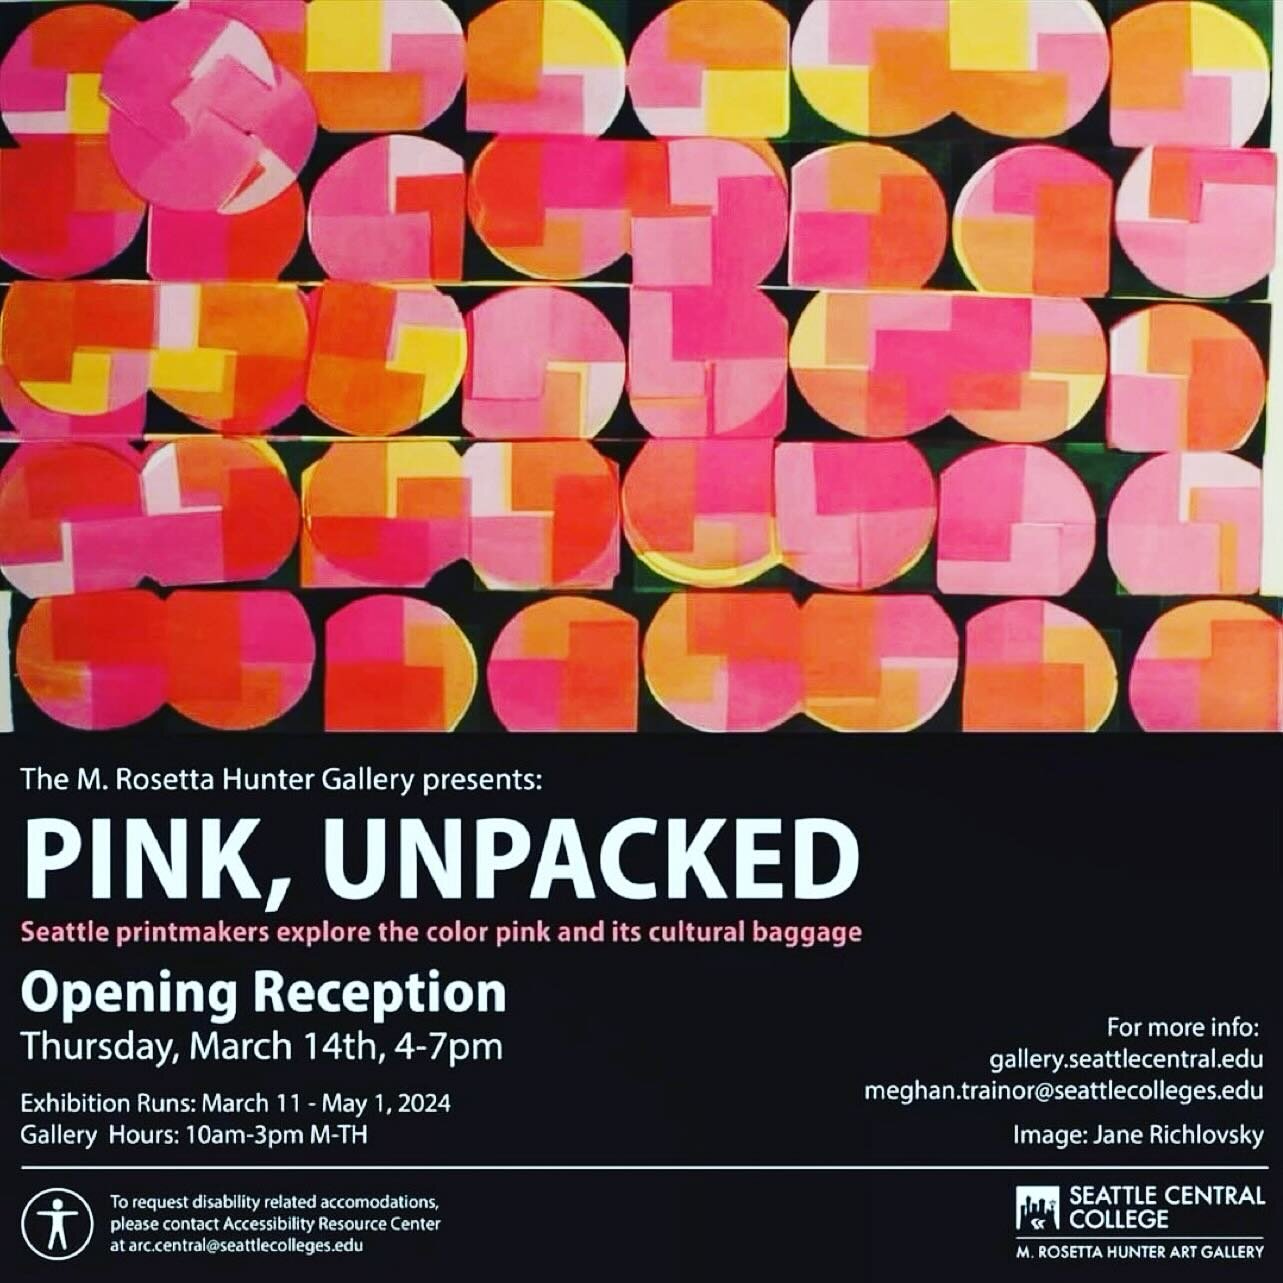 Join Seattle Prints Arts at the opening reception for &ldquo;Pink, Unpacked&rdquo; - Thursday 3/14 from 4 to 7! The gallery is inside the big Seattle Central building at 1701 Broadway (you can&rsquo;t see it from the street). Hope to see you there!